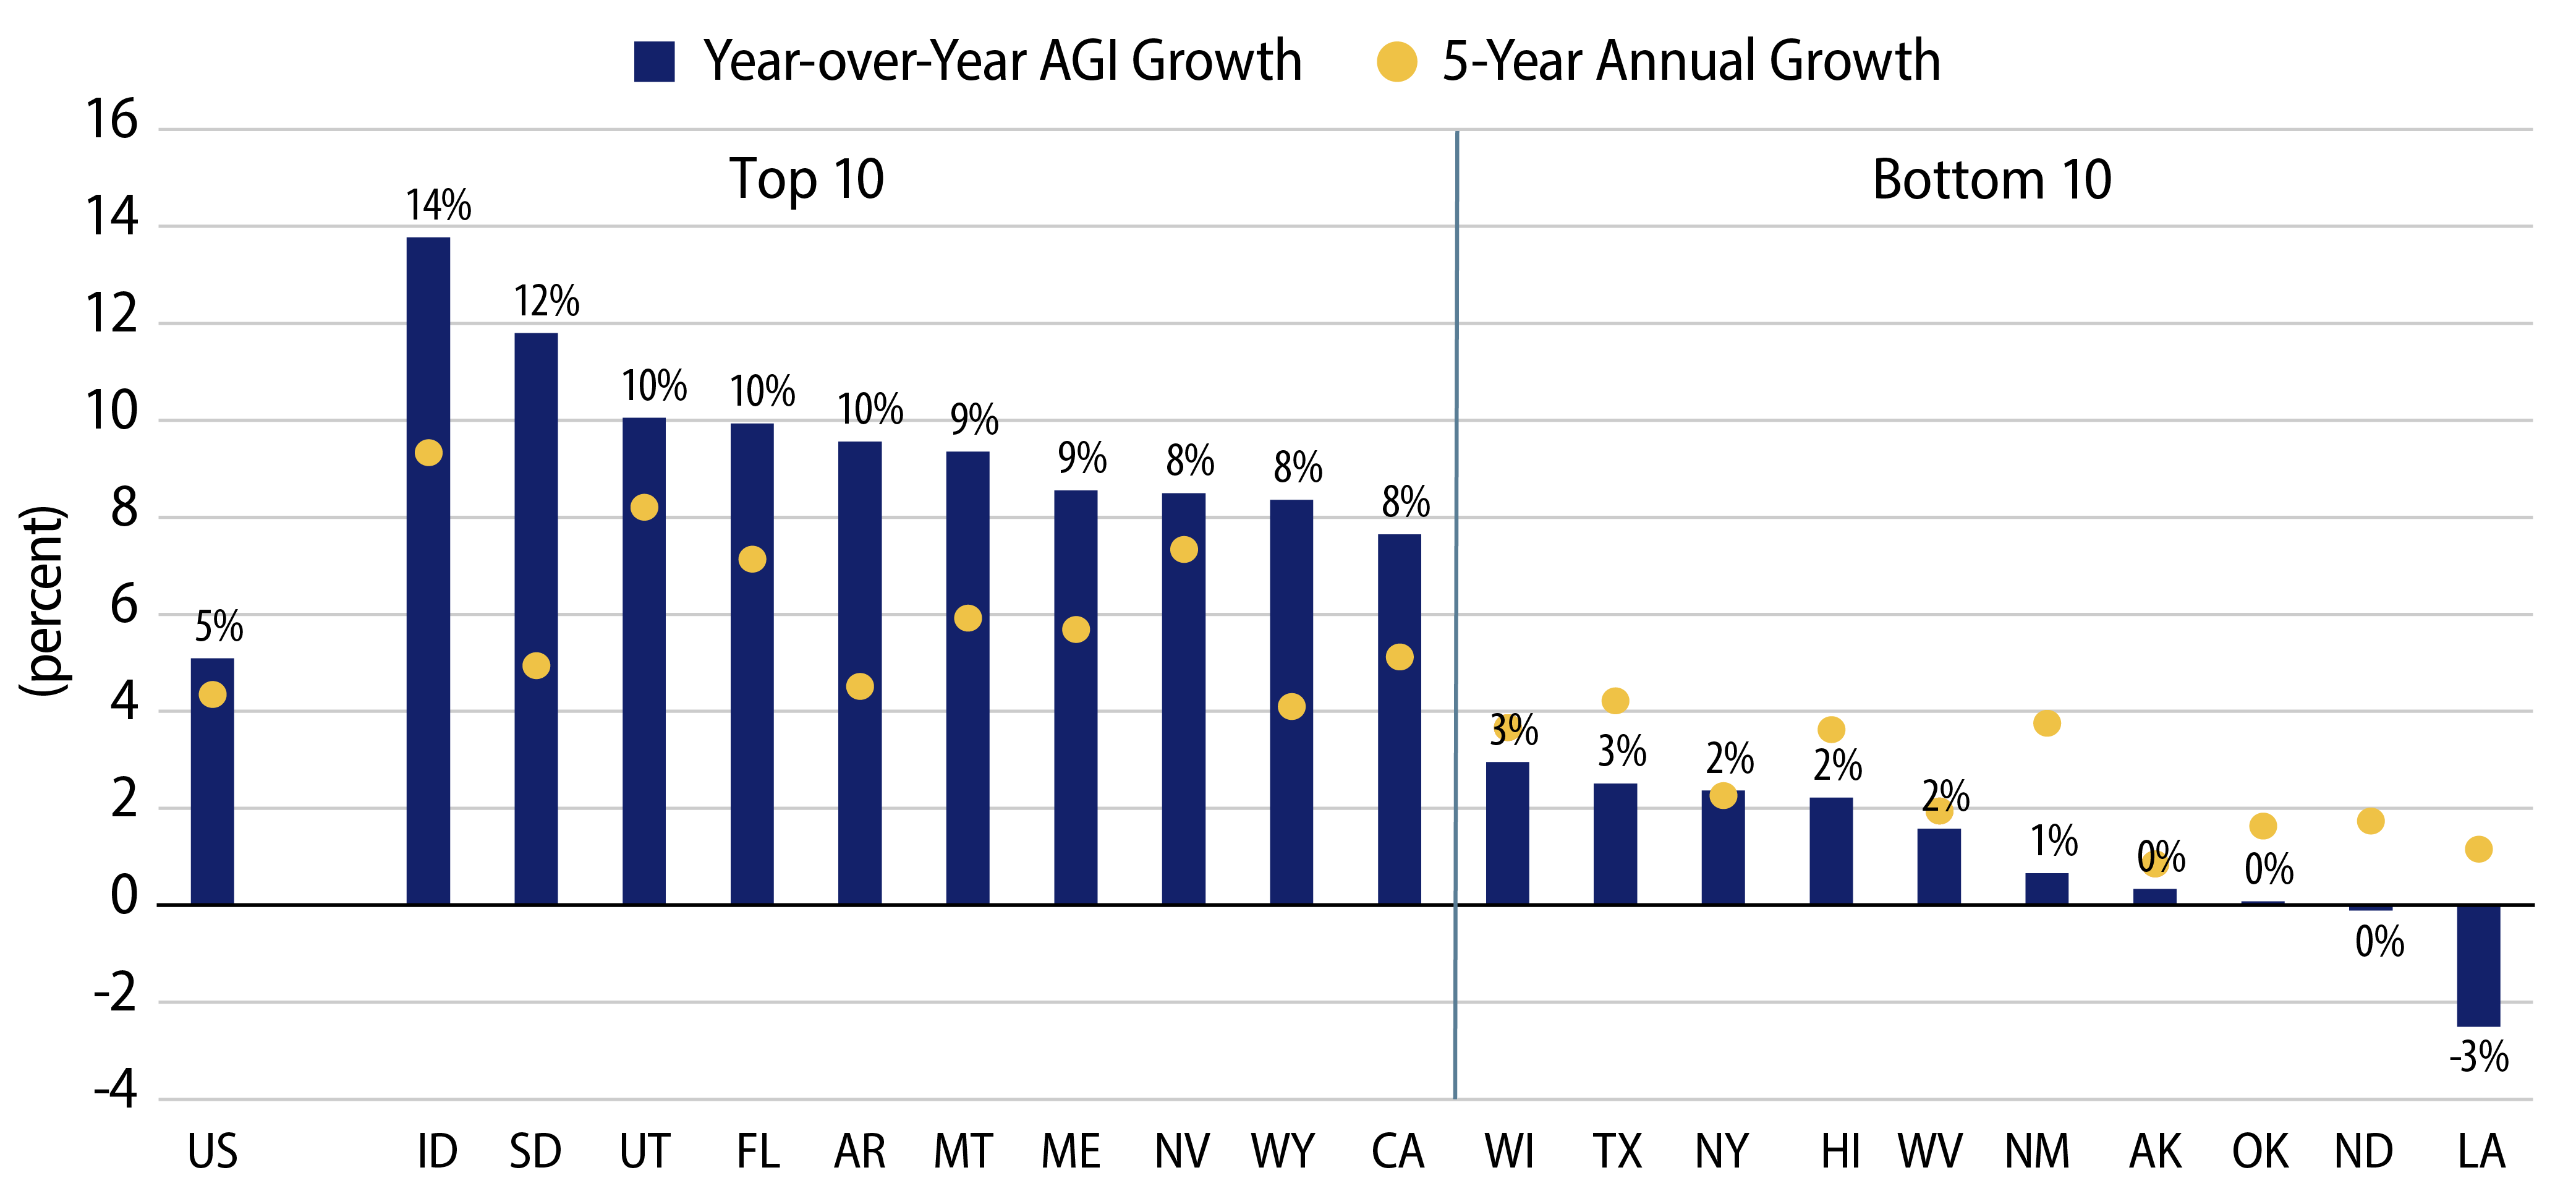 Explore 2020 AGI Growth Rates vs. 5-Year Annual Growth Rates